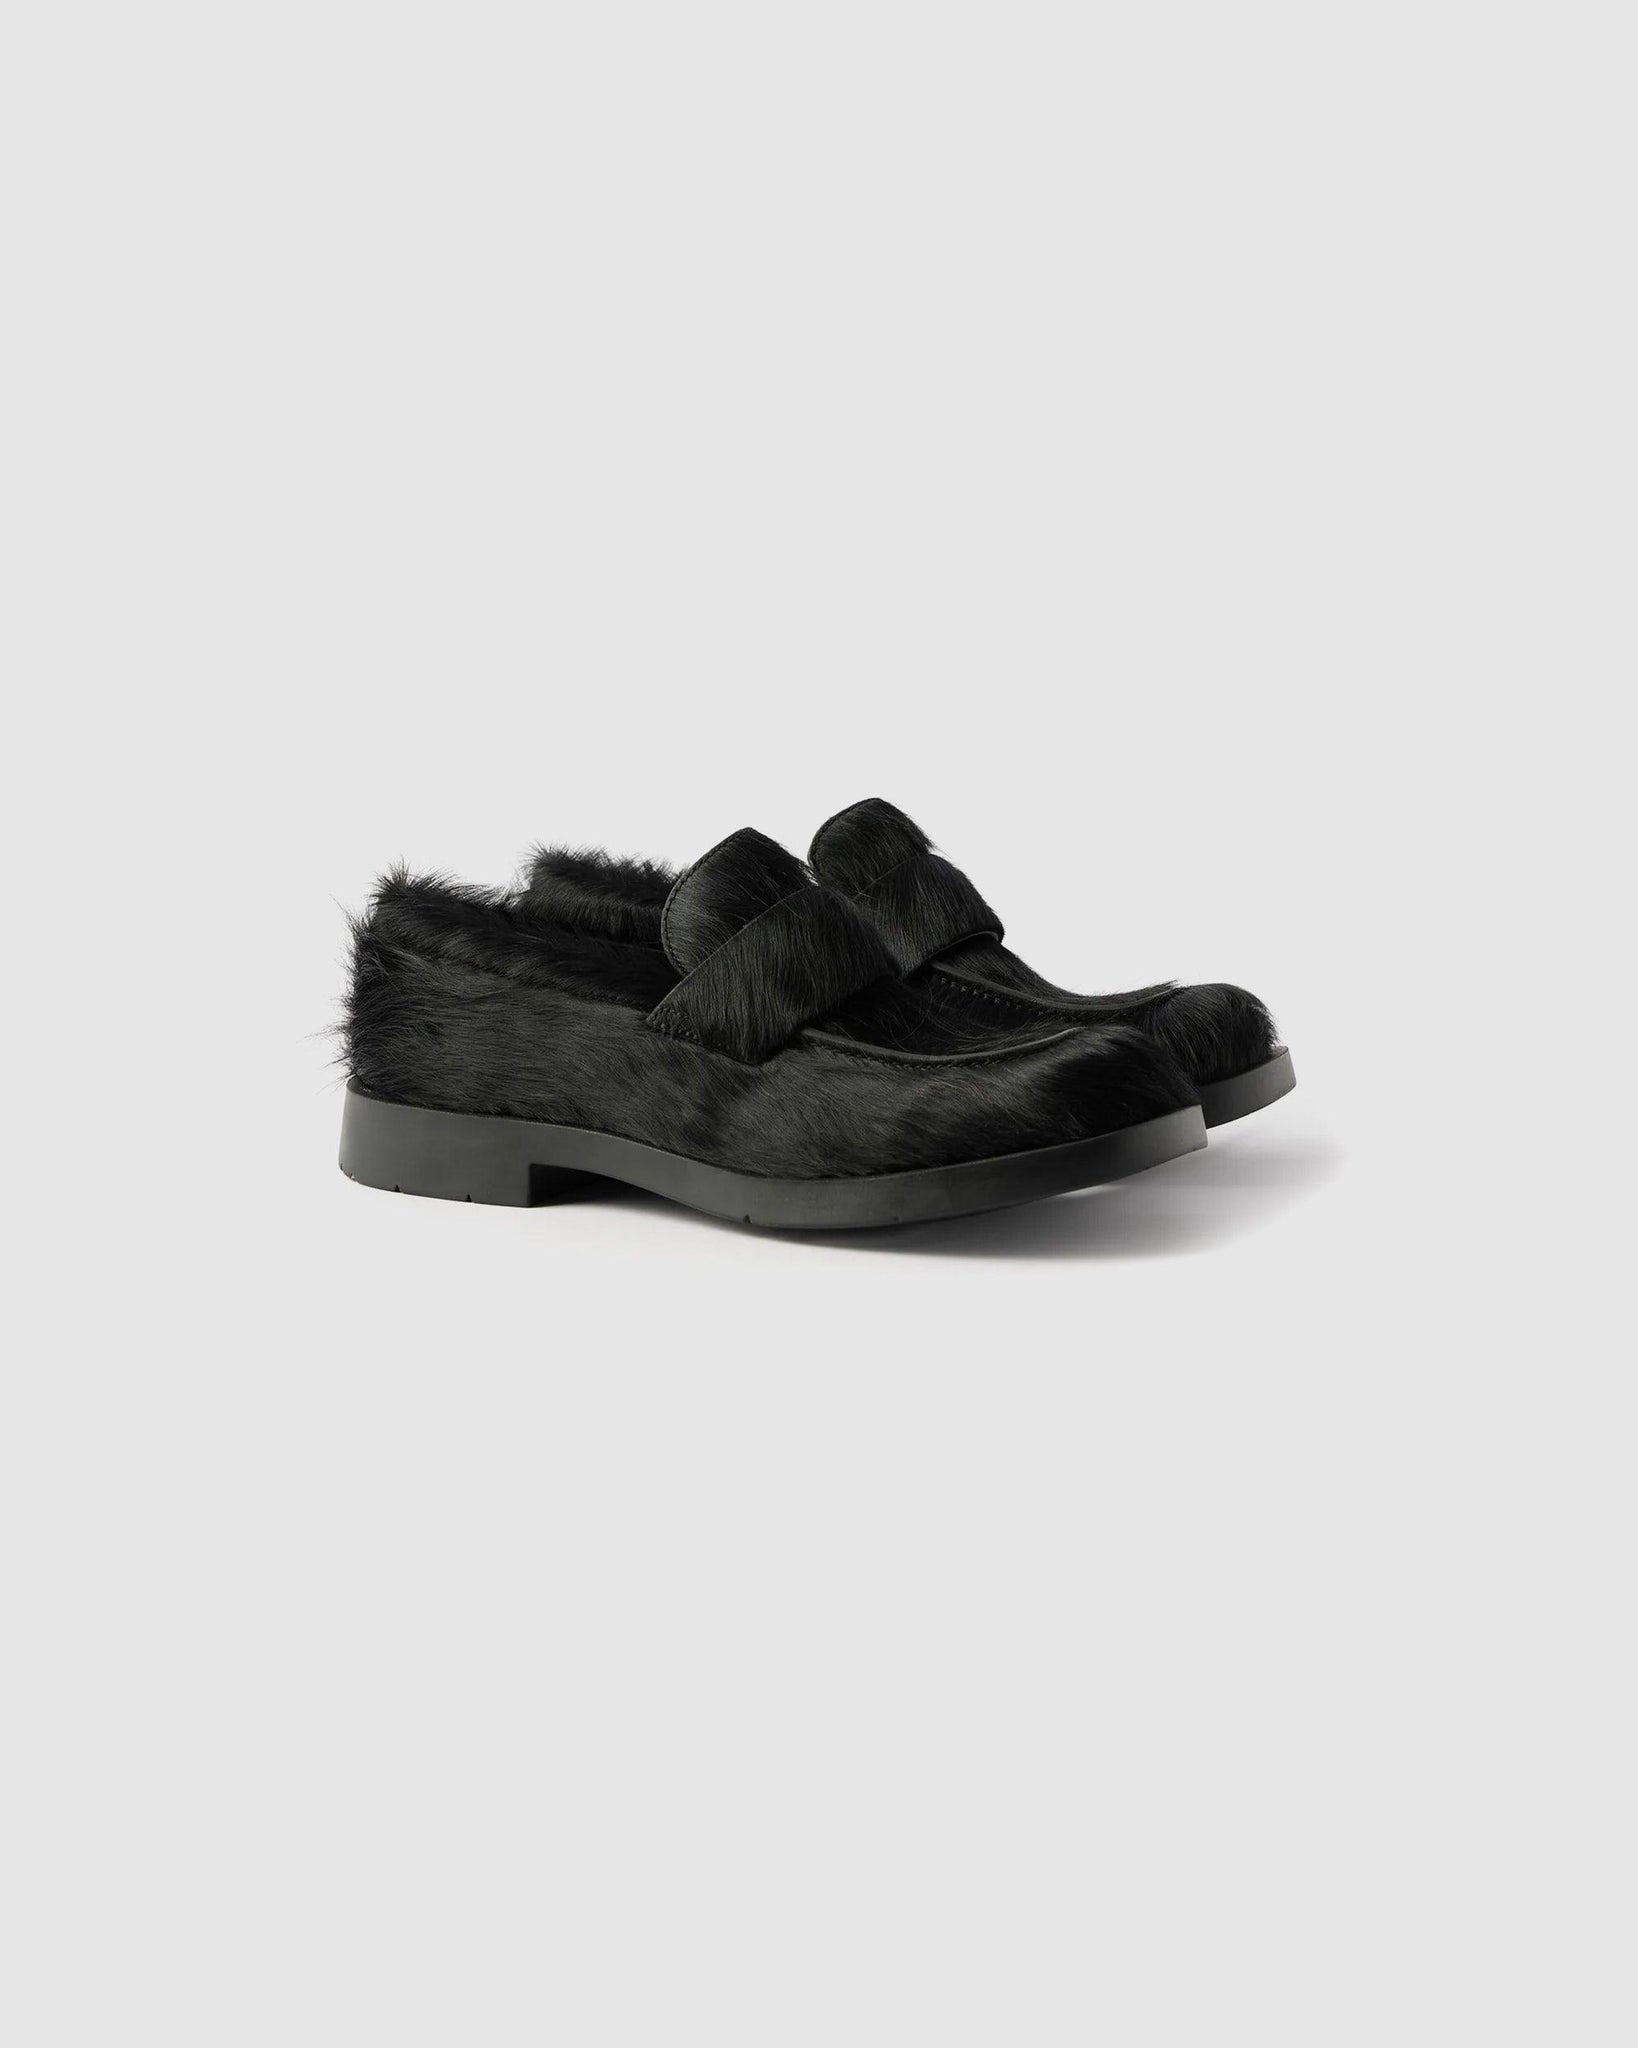 Yakari Black 1978 Loafers - {{ collection.title }} - Chinatown Country Club 